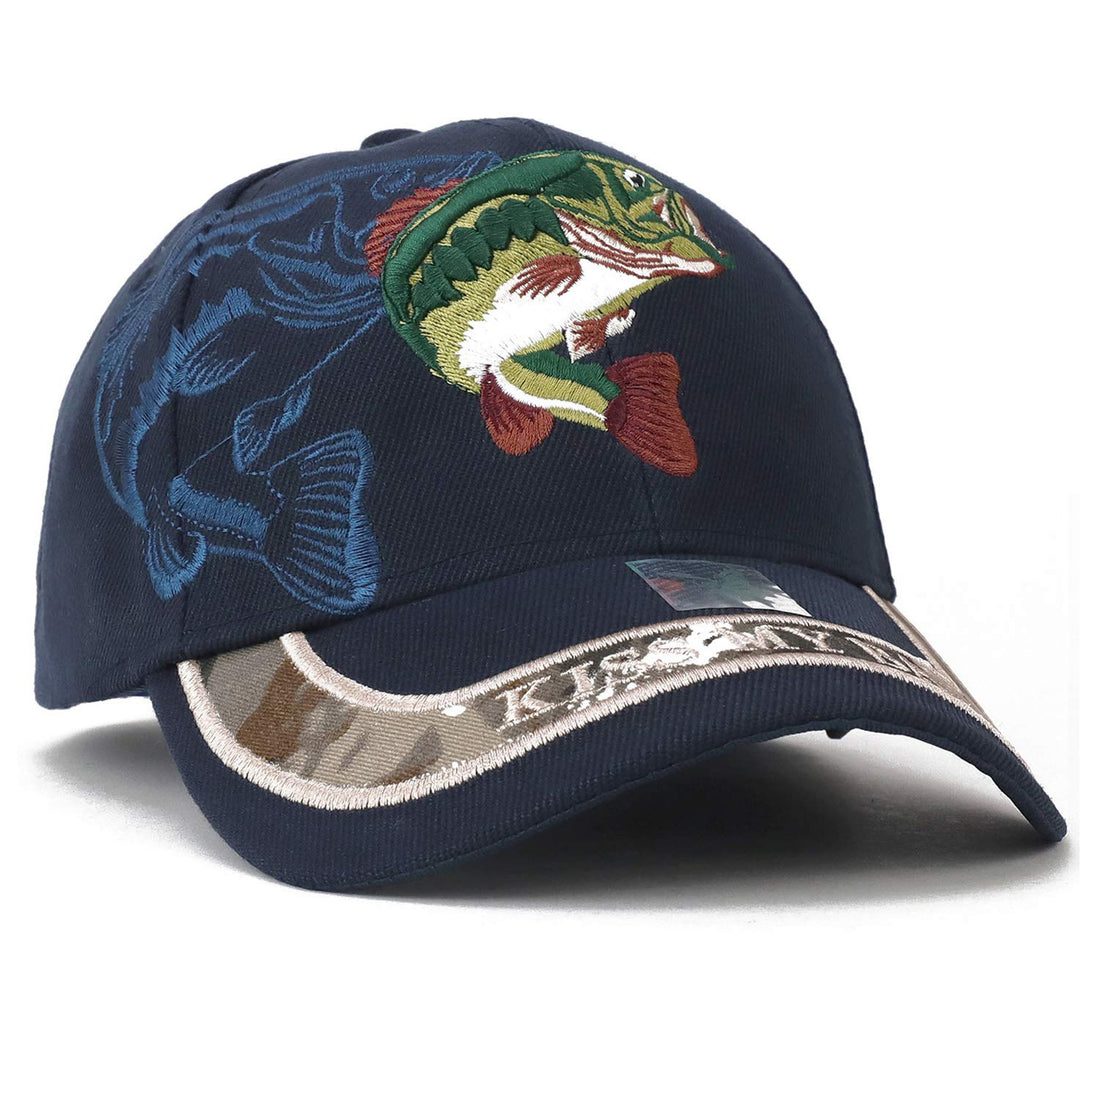 Shut Up and Fish Camo Fishing Hat Cap with Bass Embroidery